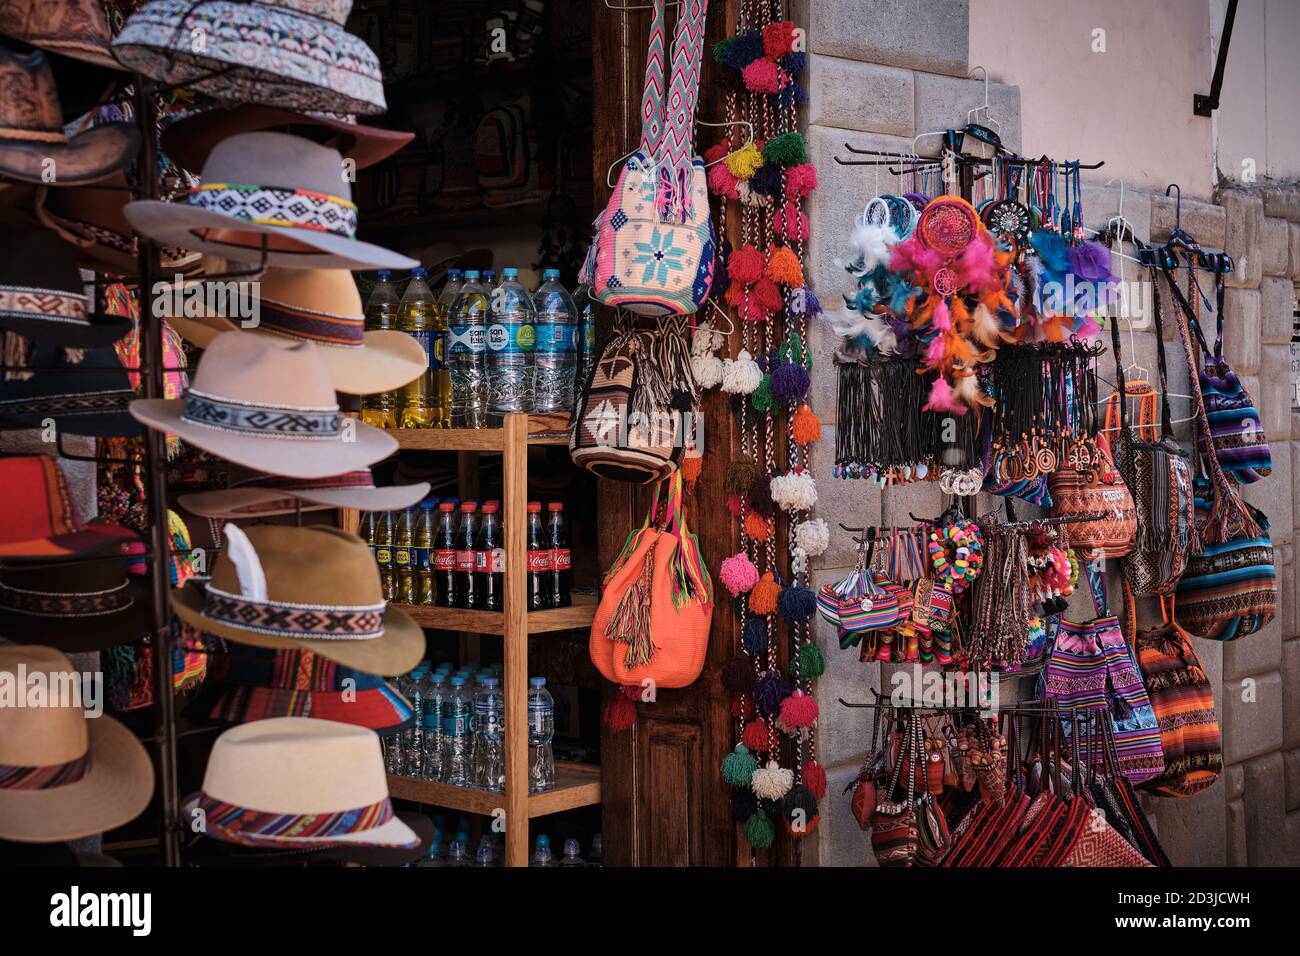 A market stall at Pisac Pisaq Market, Peru, selling novelty gifts, souvenirs, hats, and soft drinks Stock Photo